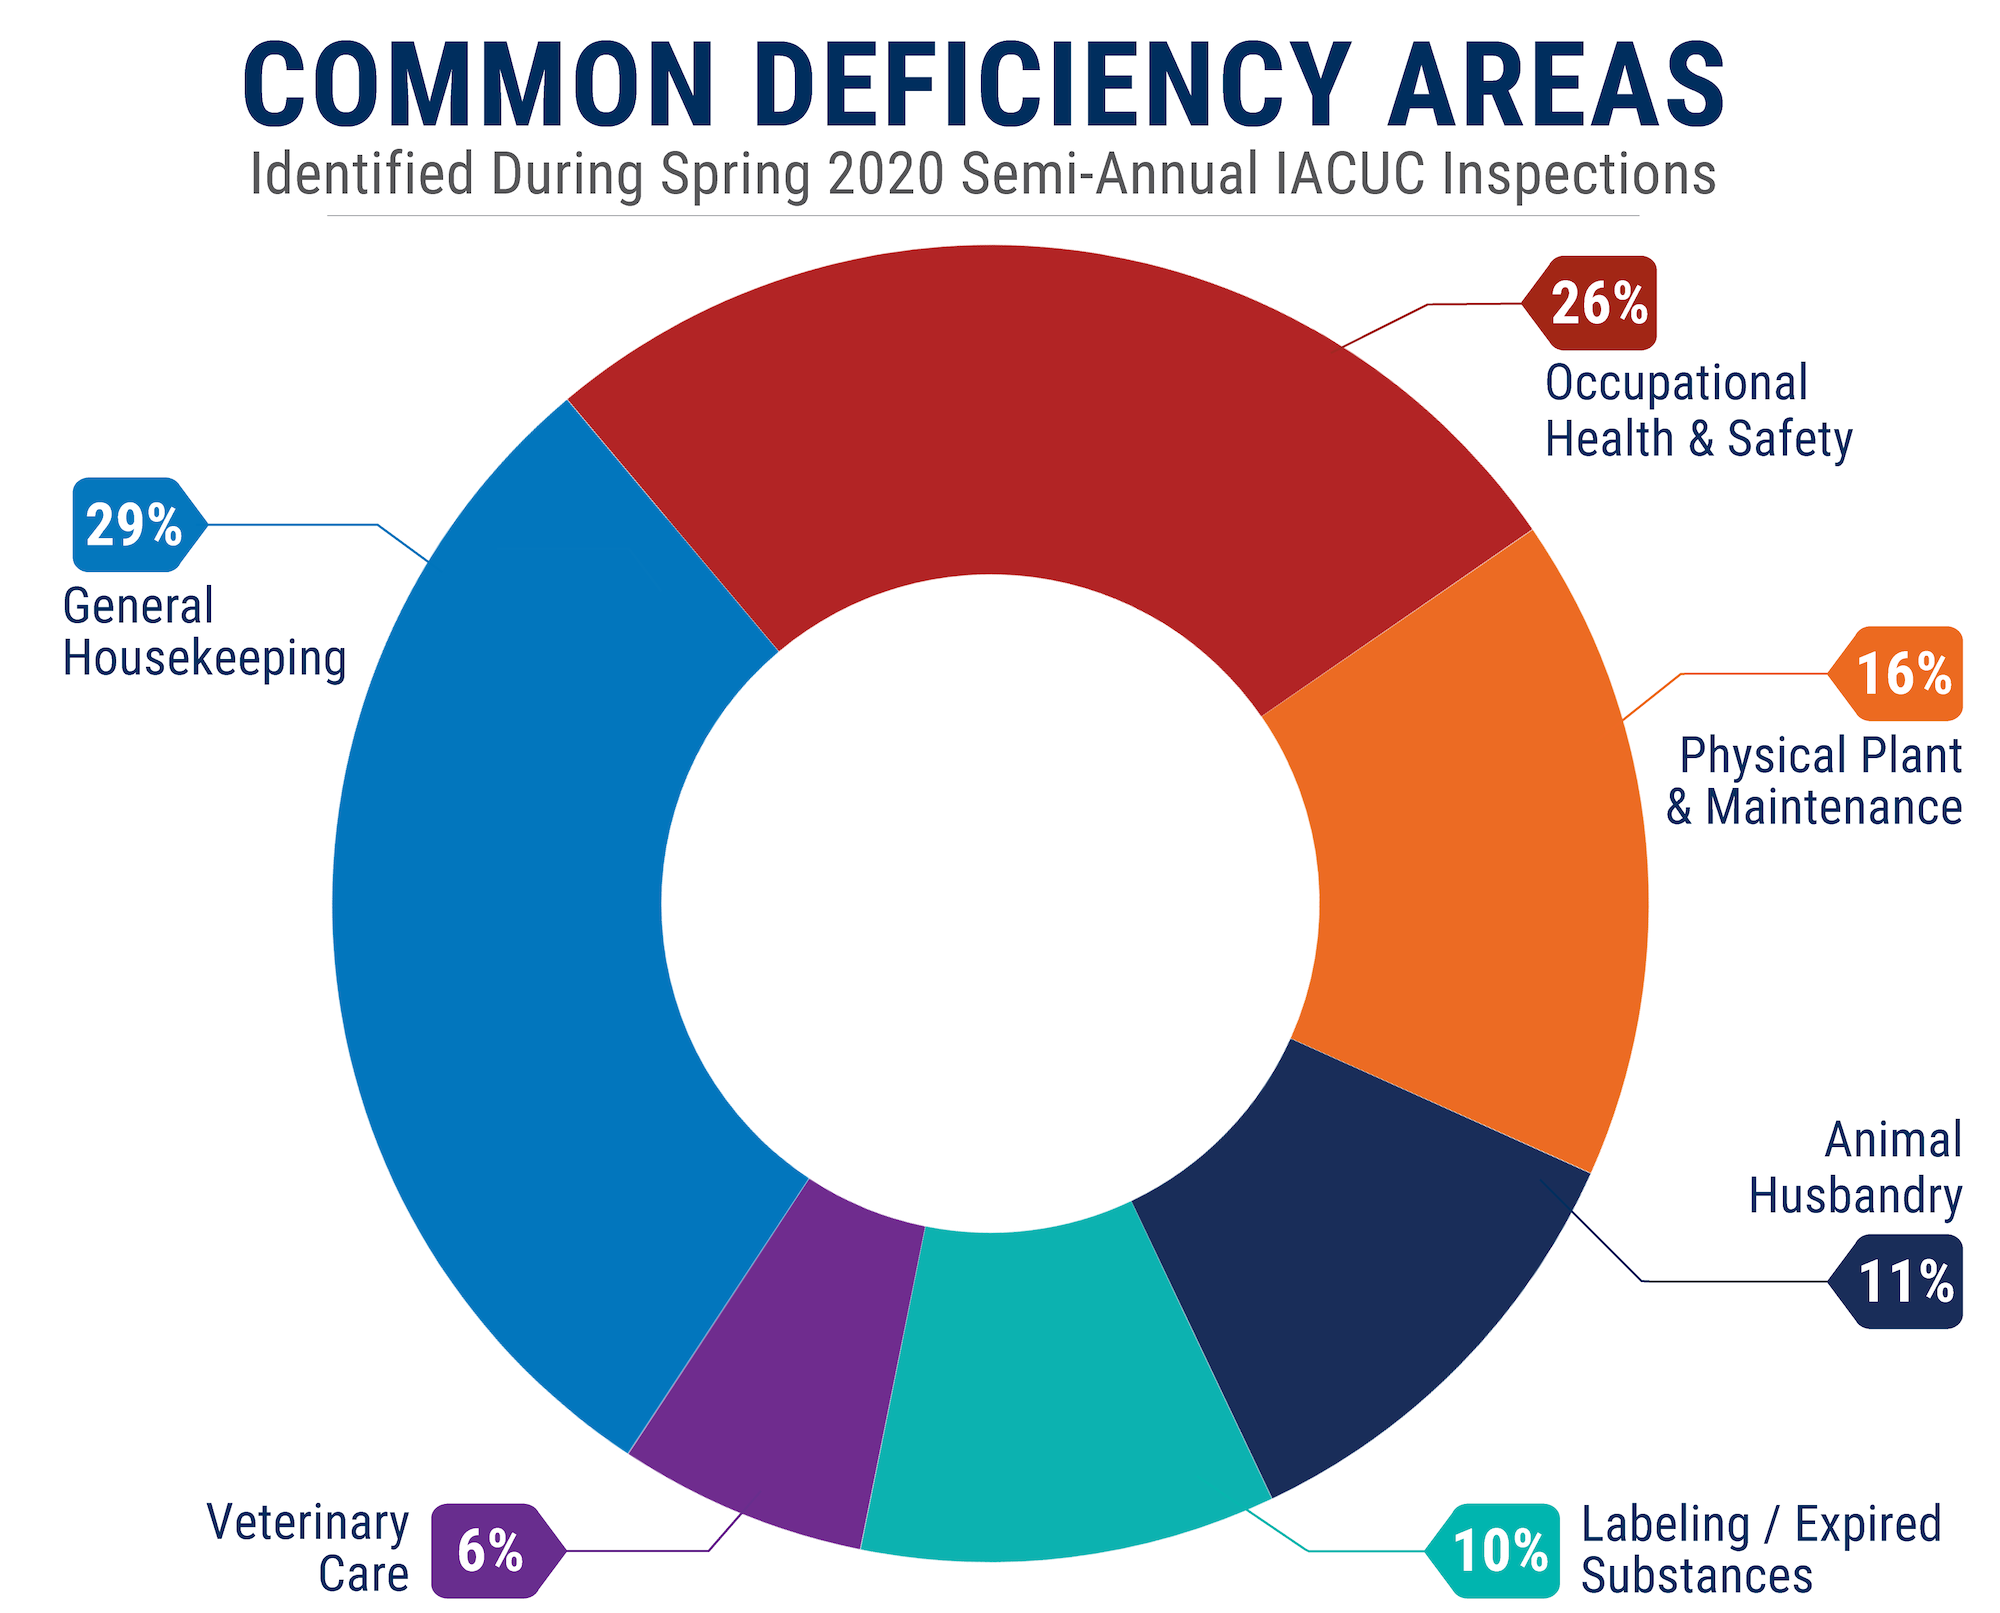 Donut chart outlining common deficiency areas found during Spring 2020 semi-annual IACUC facility inspections